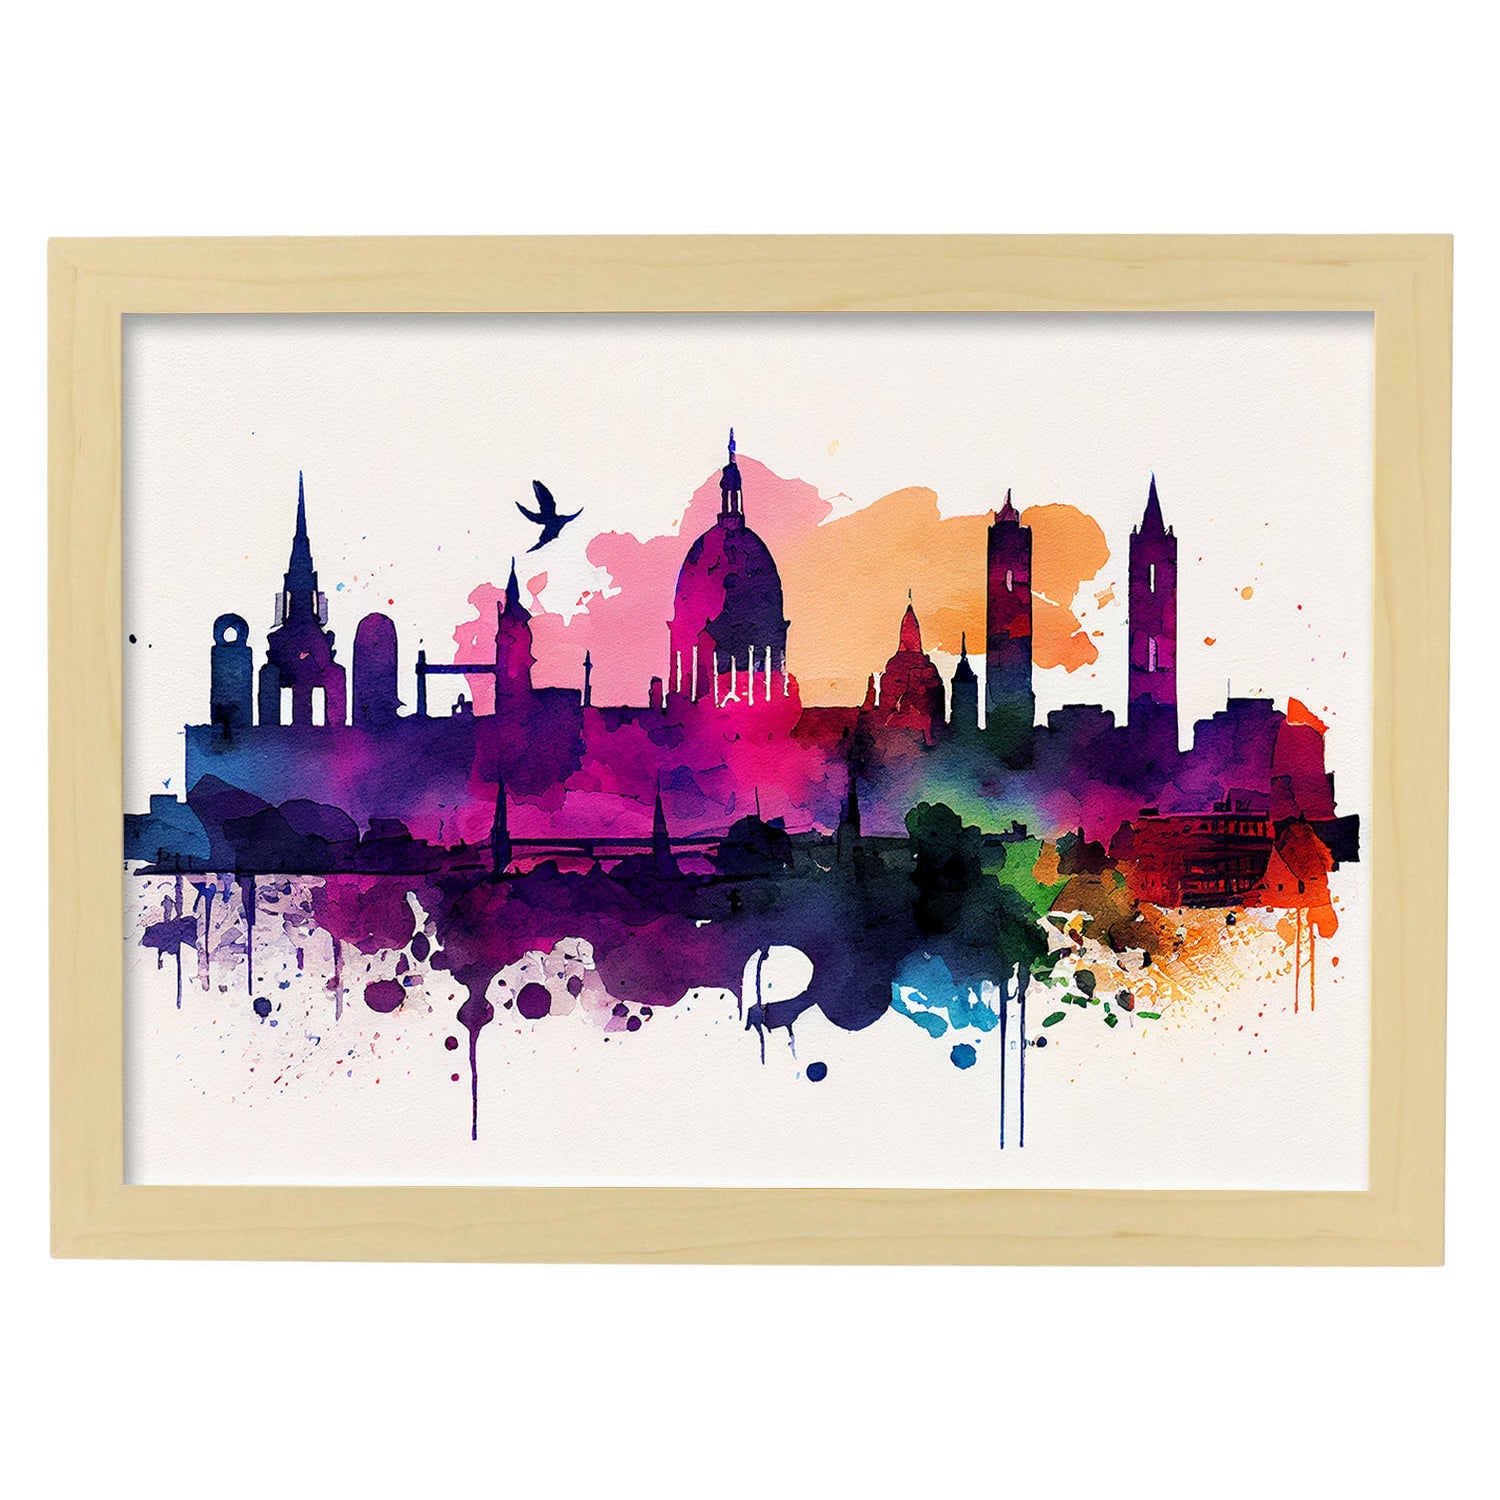 Nacnic watercolor of a skyline of the city of Dublin. Aesthetic Wall Art Prints for Bedroom or Living Room Design.-Artwork-Nacnic-A4-Marco Madera Clara-Nacnic Estudio SL